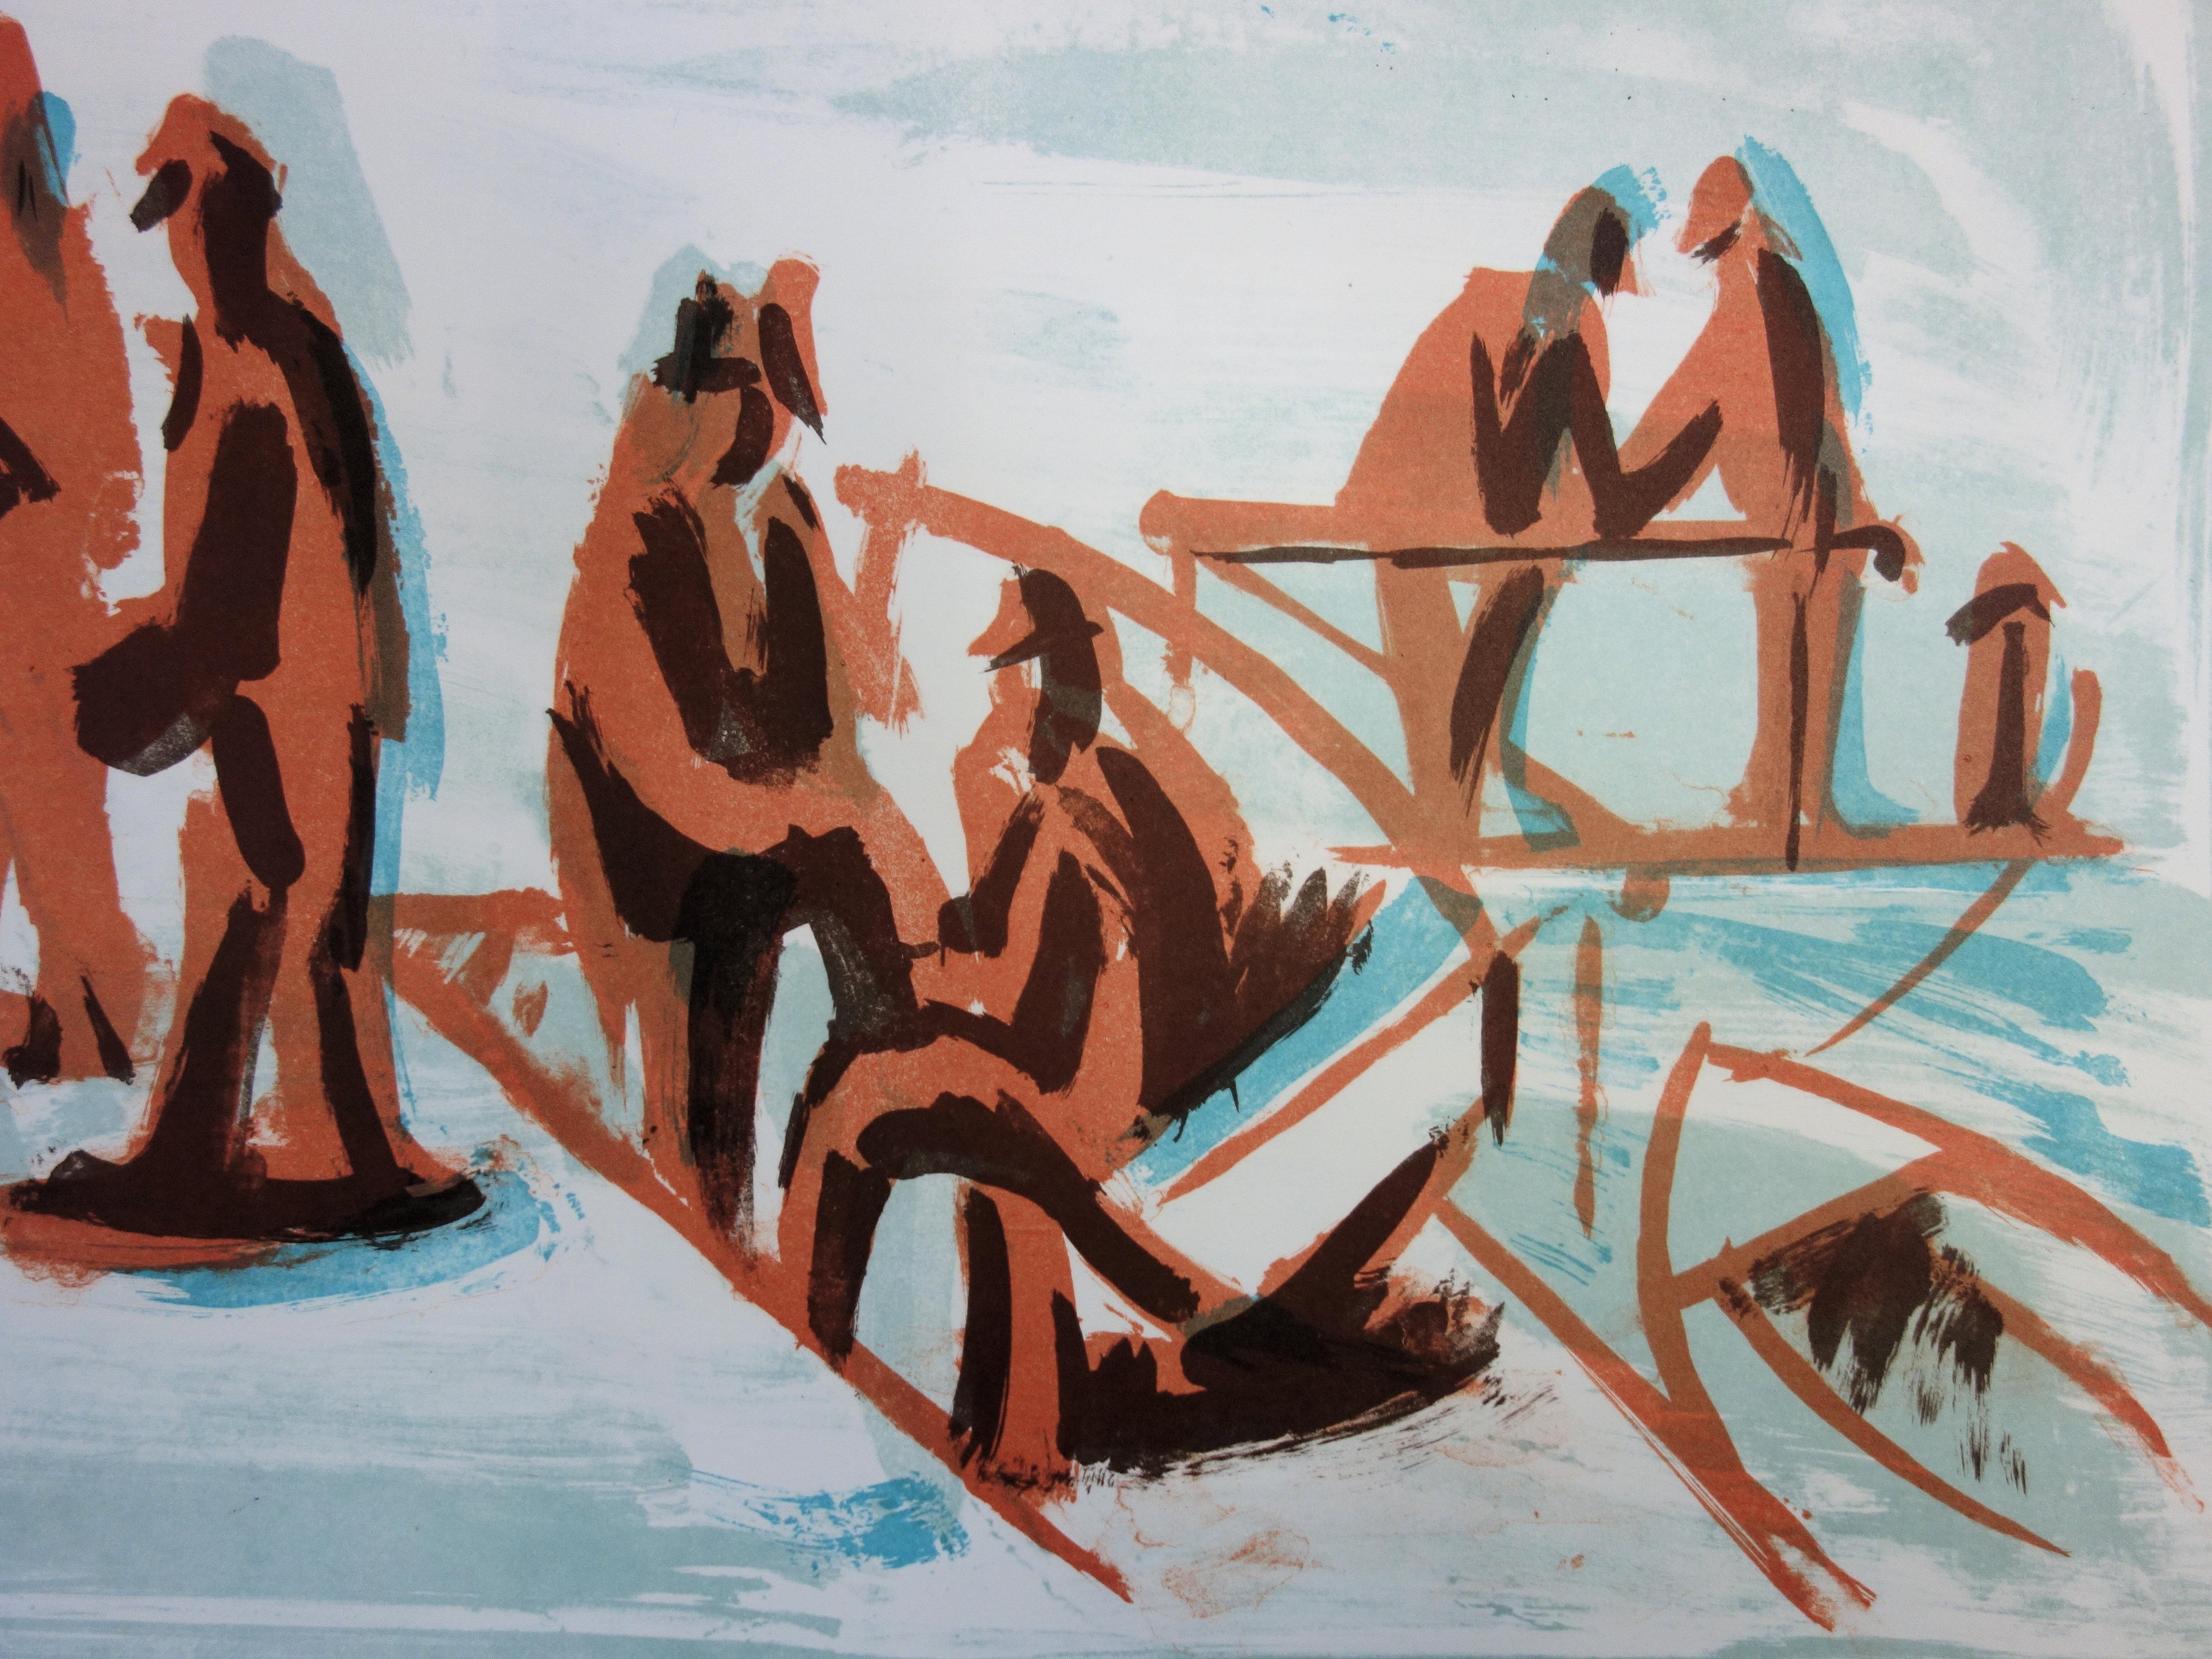 Fishermen and People at the Harbor - Original handsigned lithograph - 50 copies - Modern Print by Jean Helion